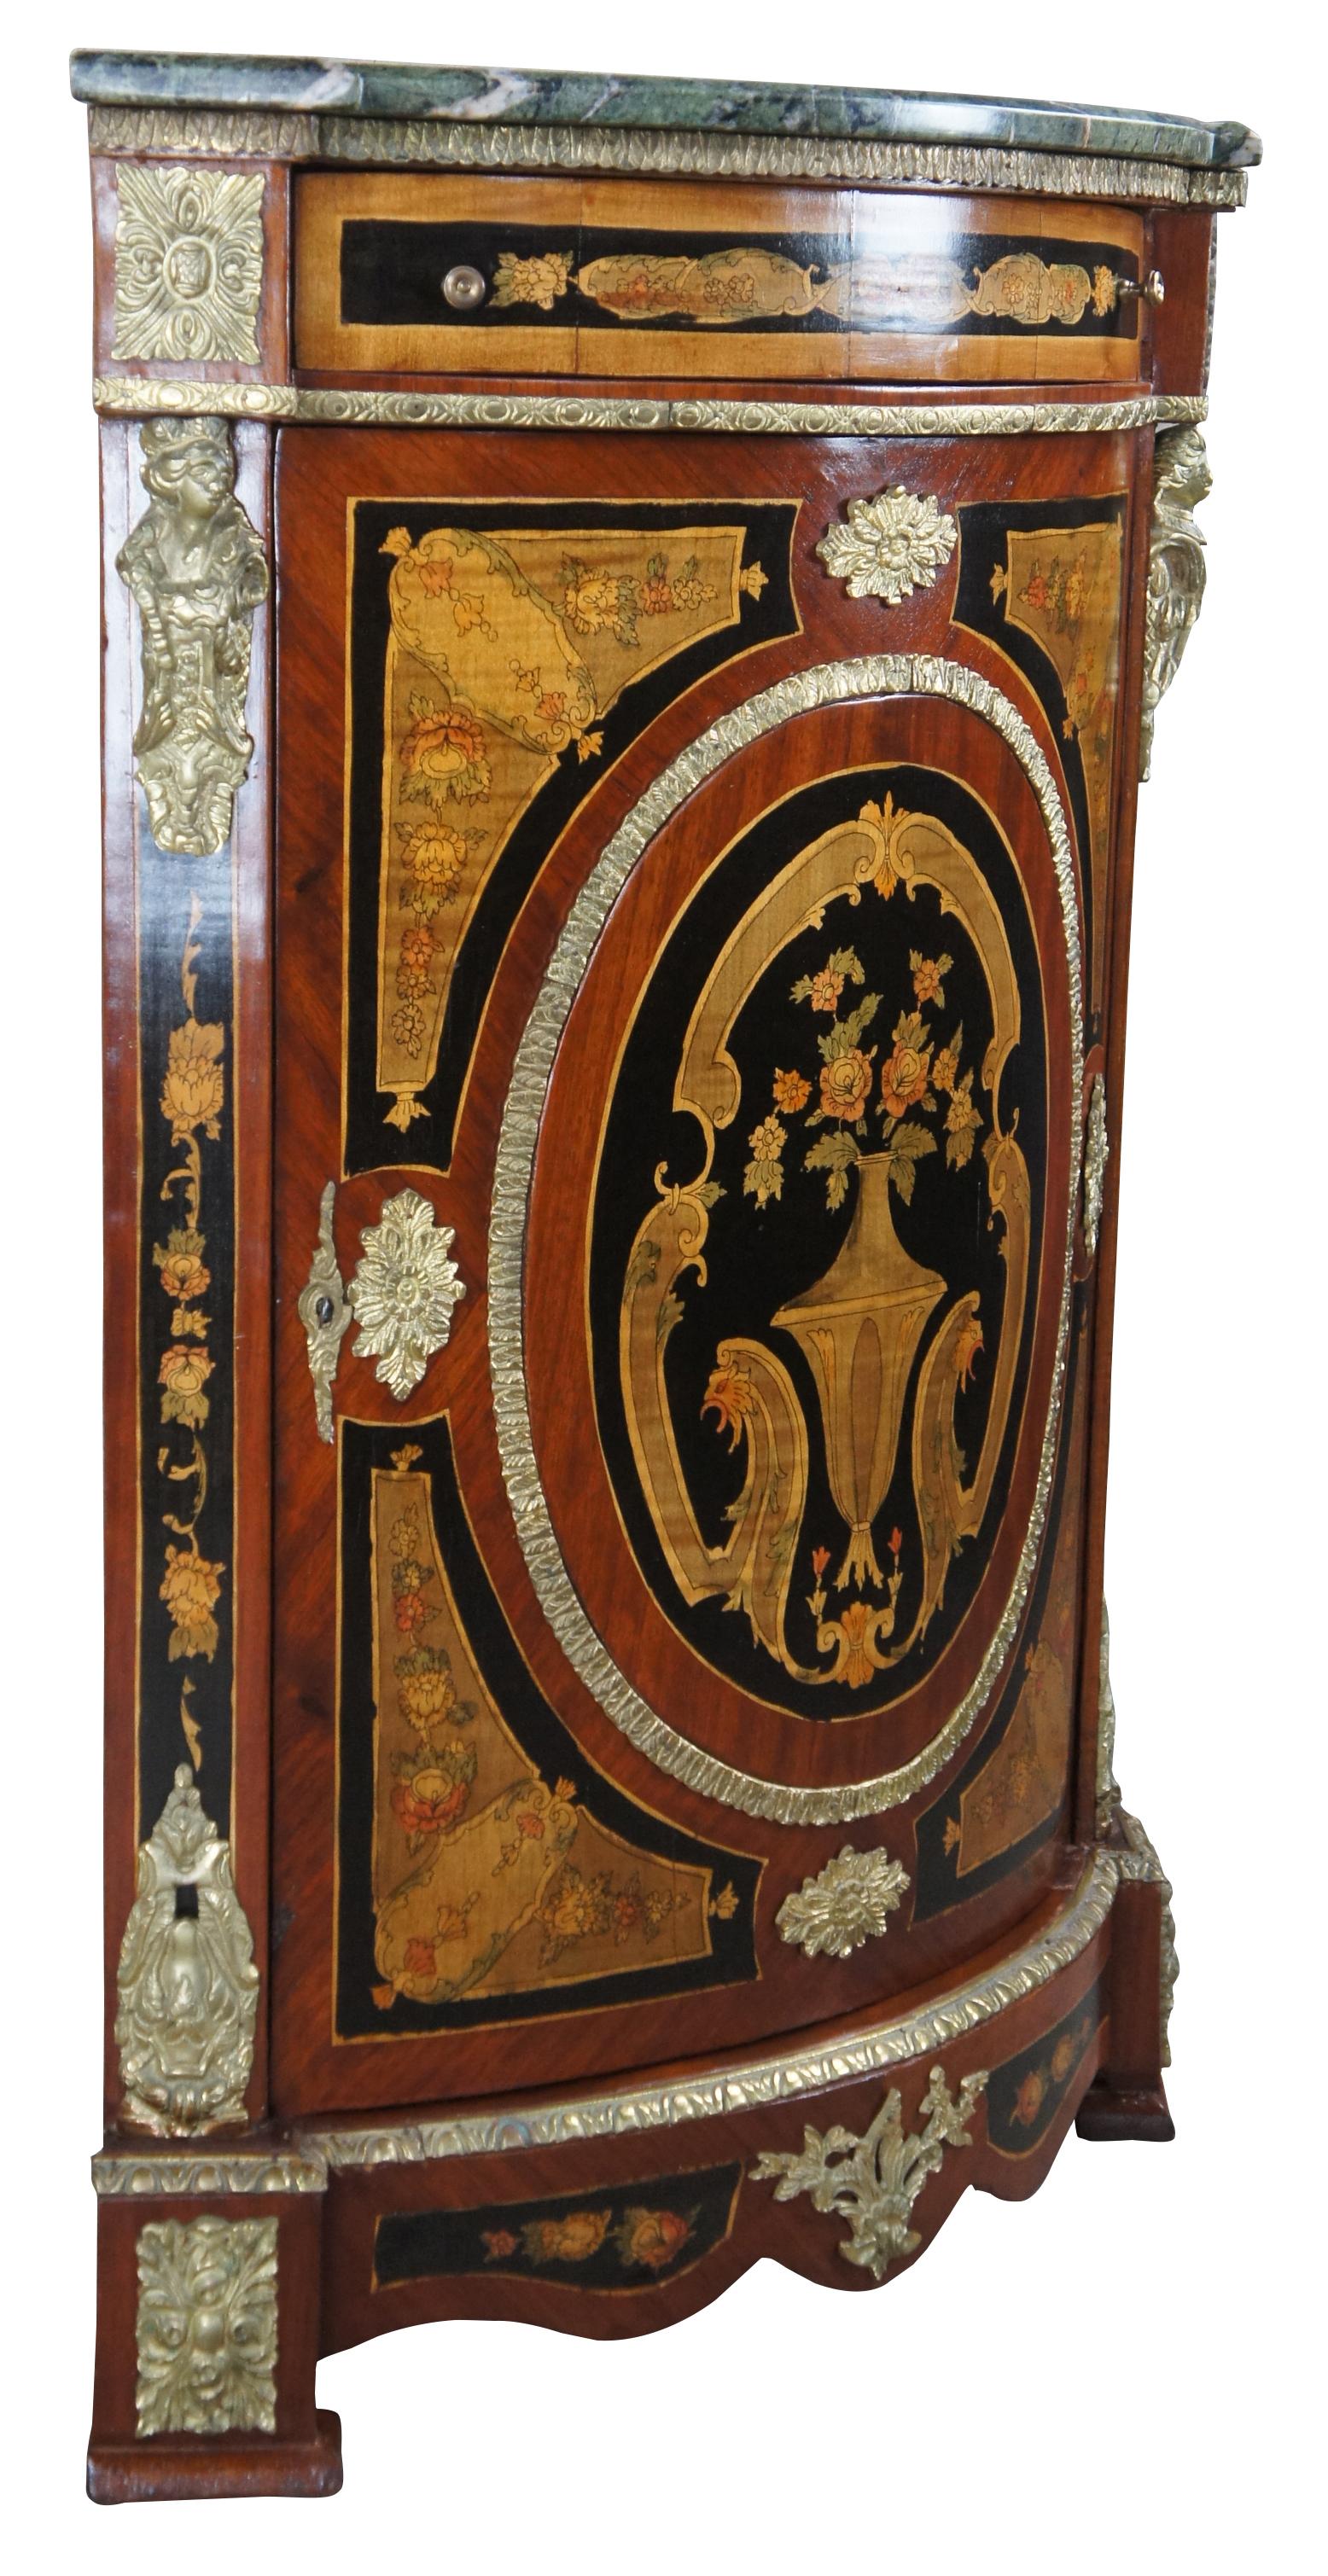 An exquisite French Boulle style corner cupboard in the manner of Napoleon III and Louis XVI, circa second half 20th century. Made from walnut with a green marble top over drawer and lower cabinet. Features painted floral motifs, brass medallions